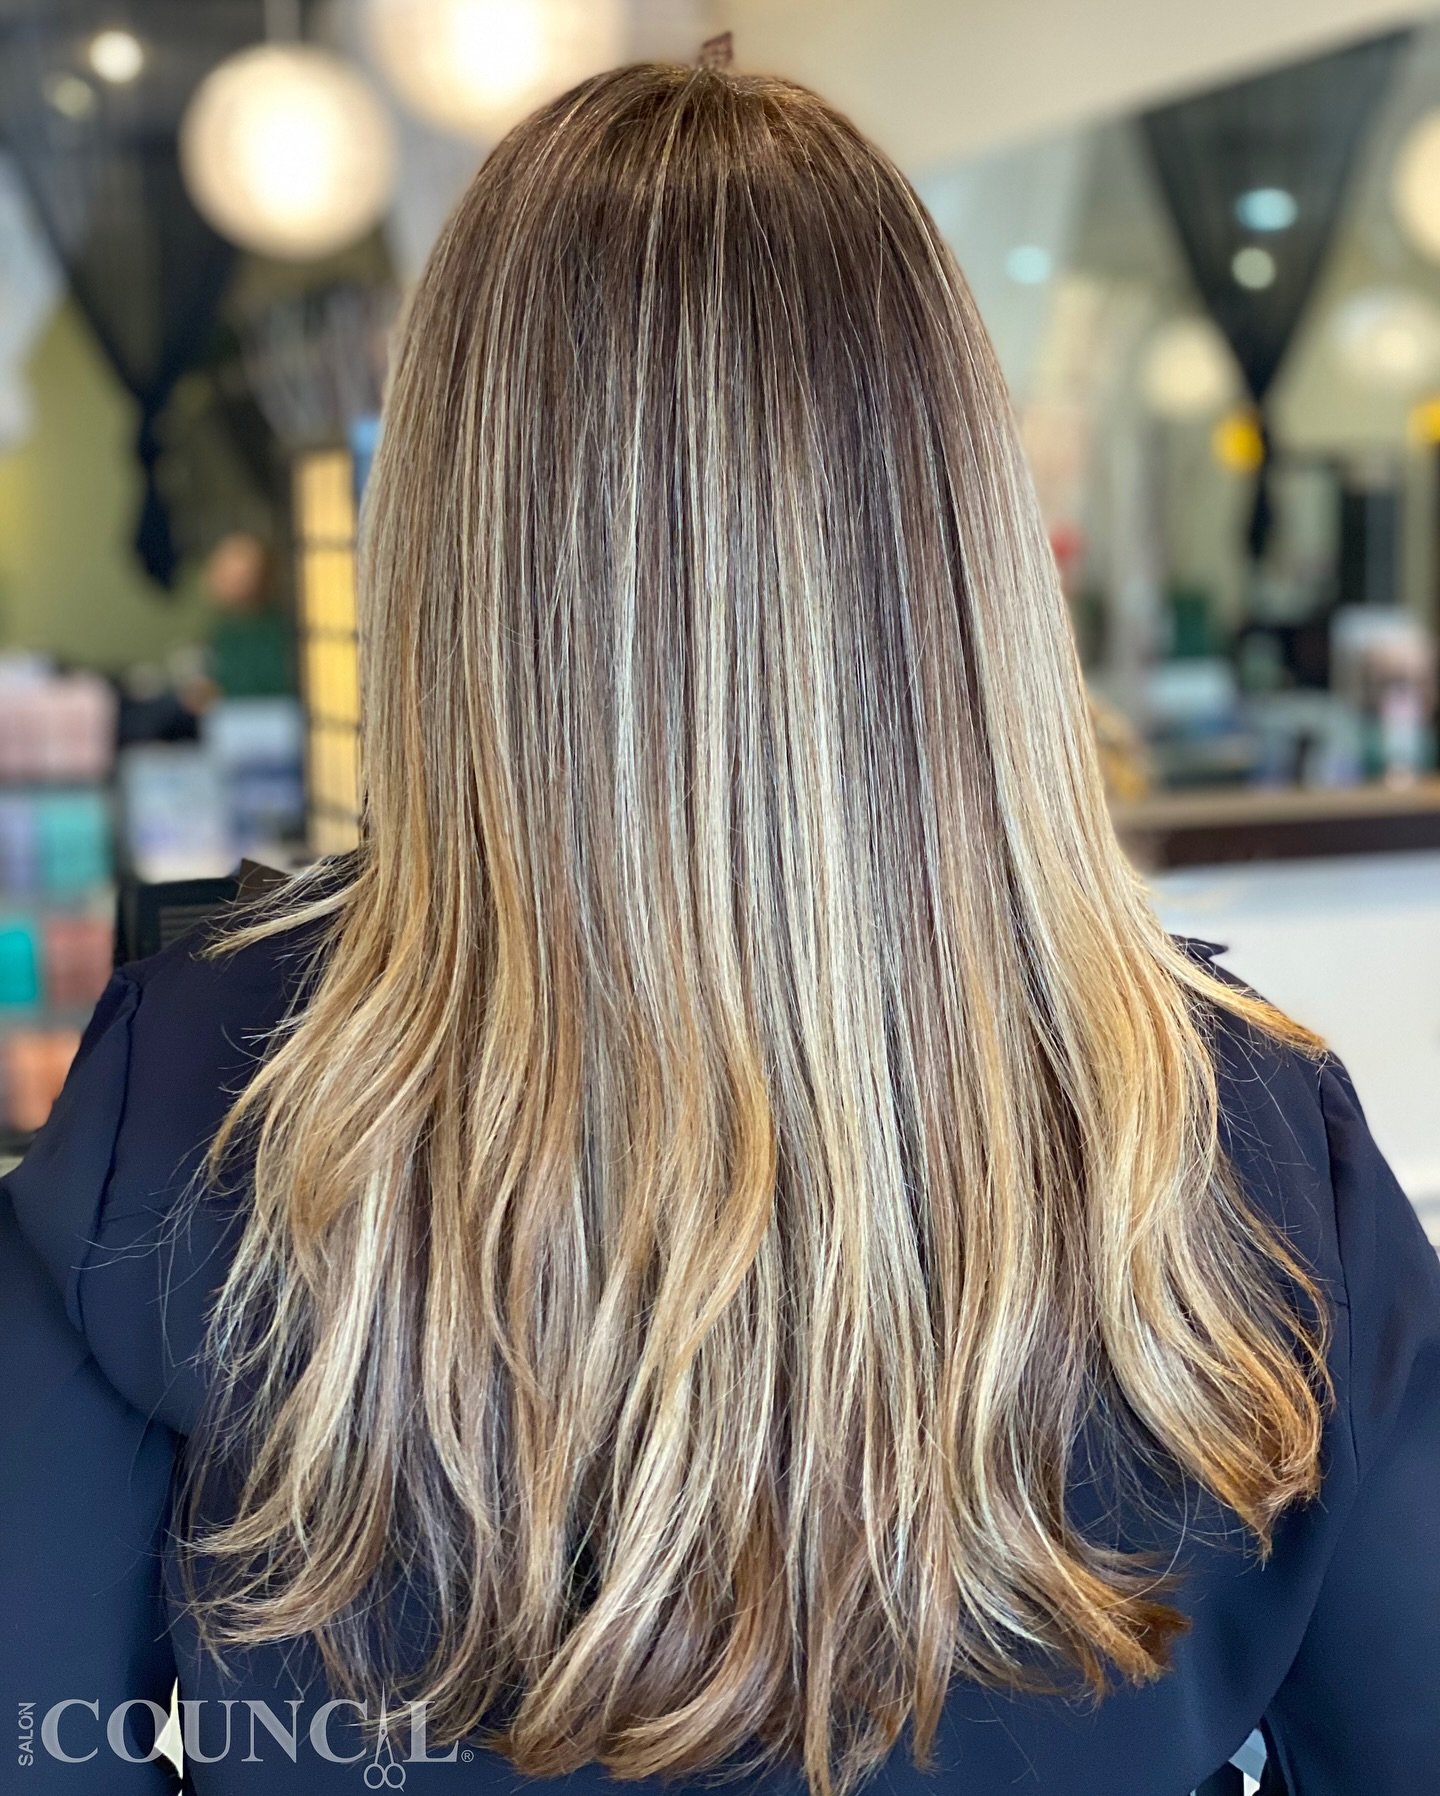 🌿#freshroots 
Keeping it sleek and chic with a color root touch-up and a fabulous blowdry style! 💇🏼&zwj;♀️✨ Consistency is key. #RootRefresh #StyleMaintenance

ROOT COLOR &bull; BLOWDRY STYLE 

Hair by TERRY @beautyby_terry 
@saloncouncilpines @sa